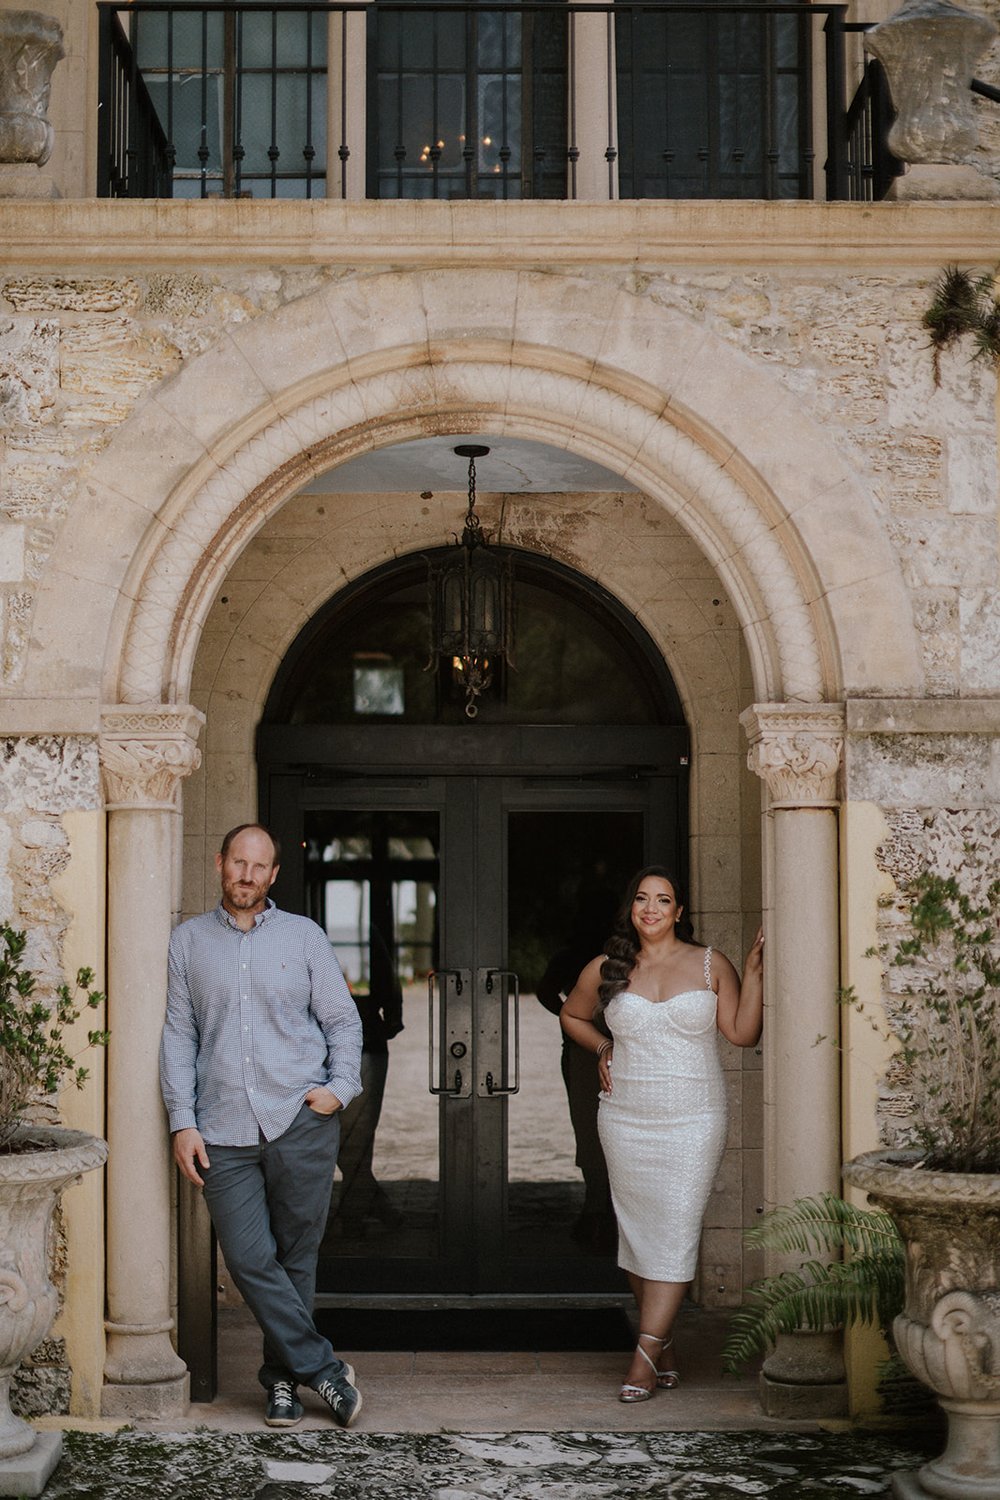 Couple standing in the archway of the Deering Estate.